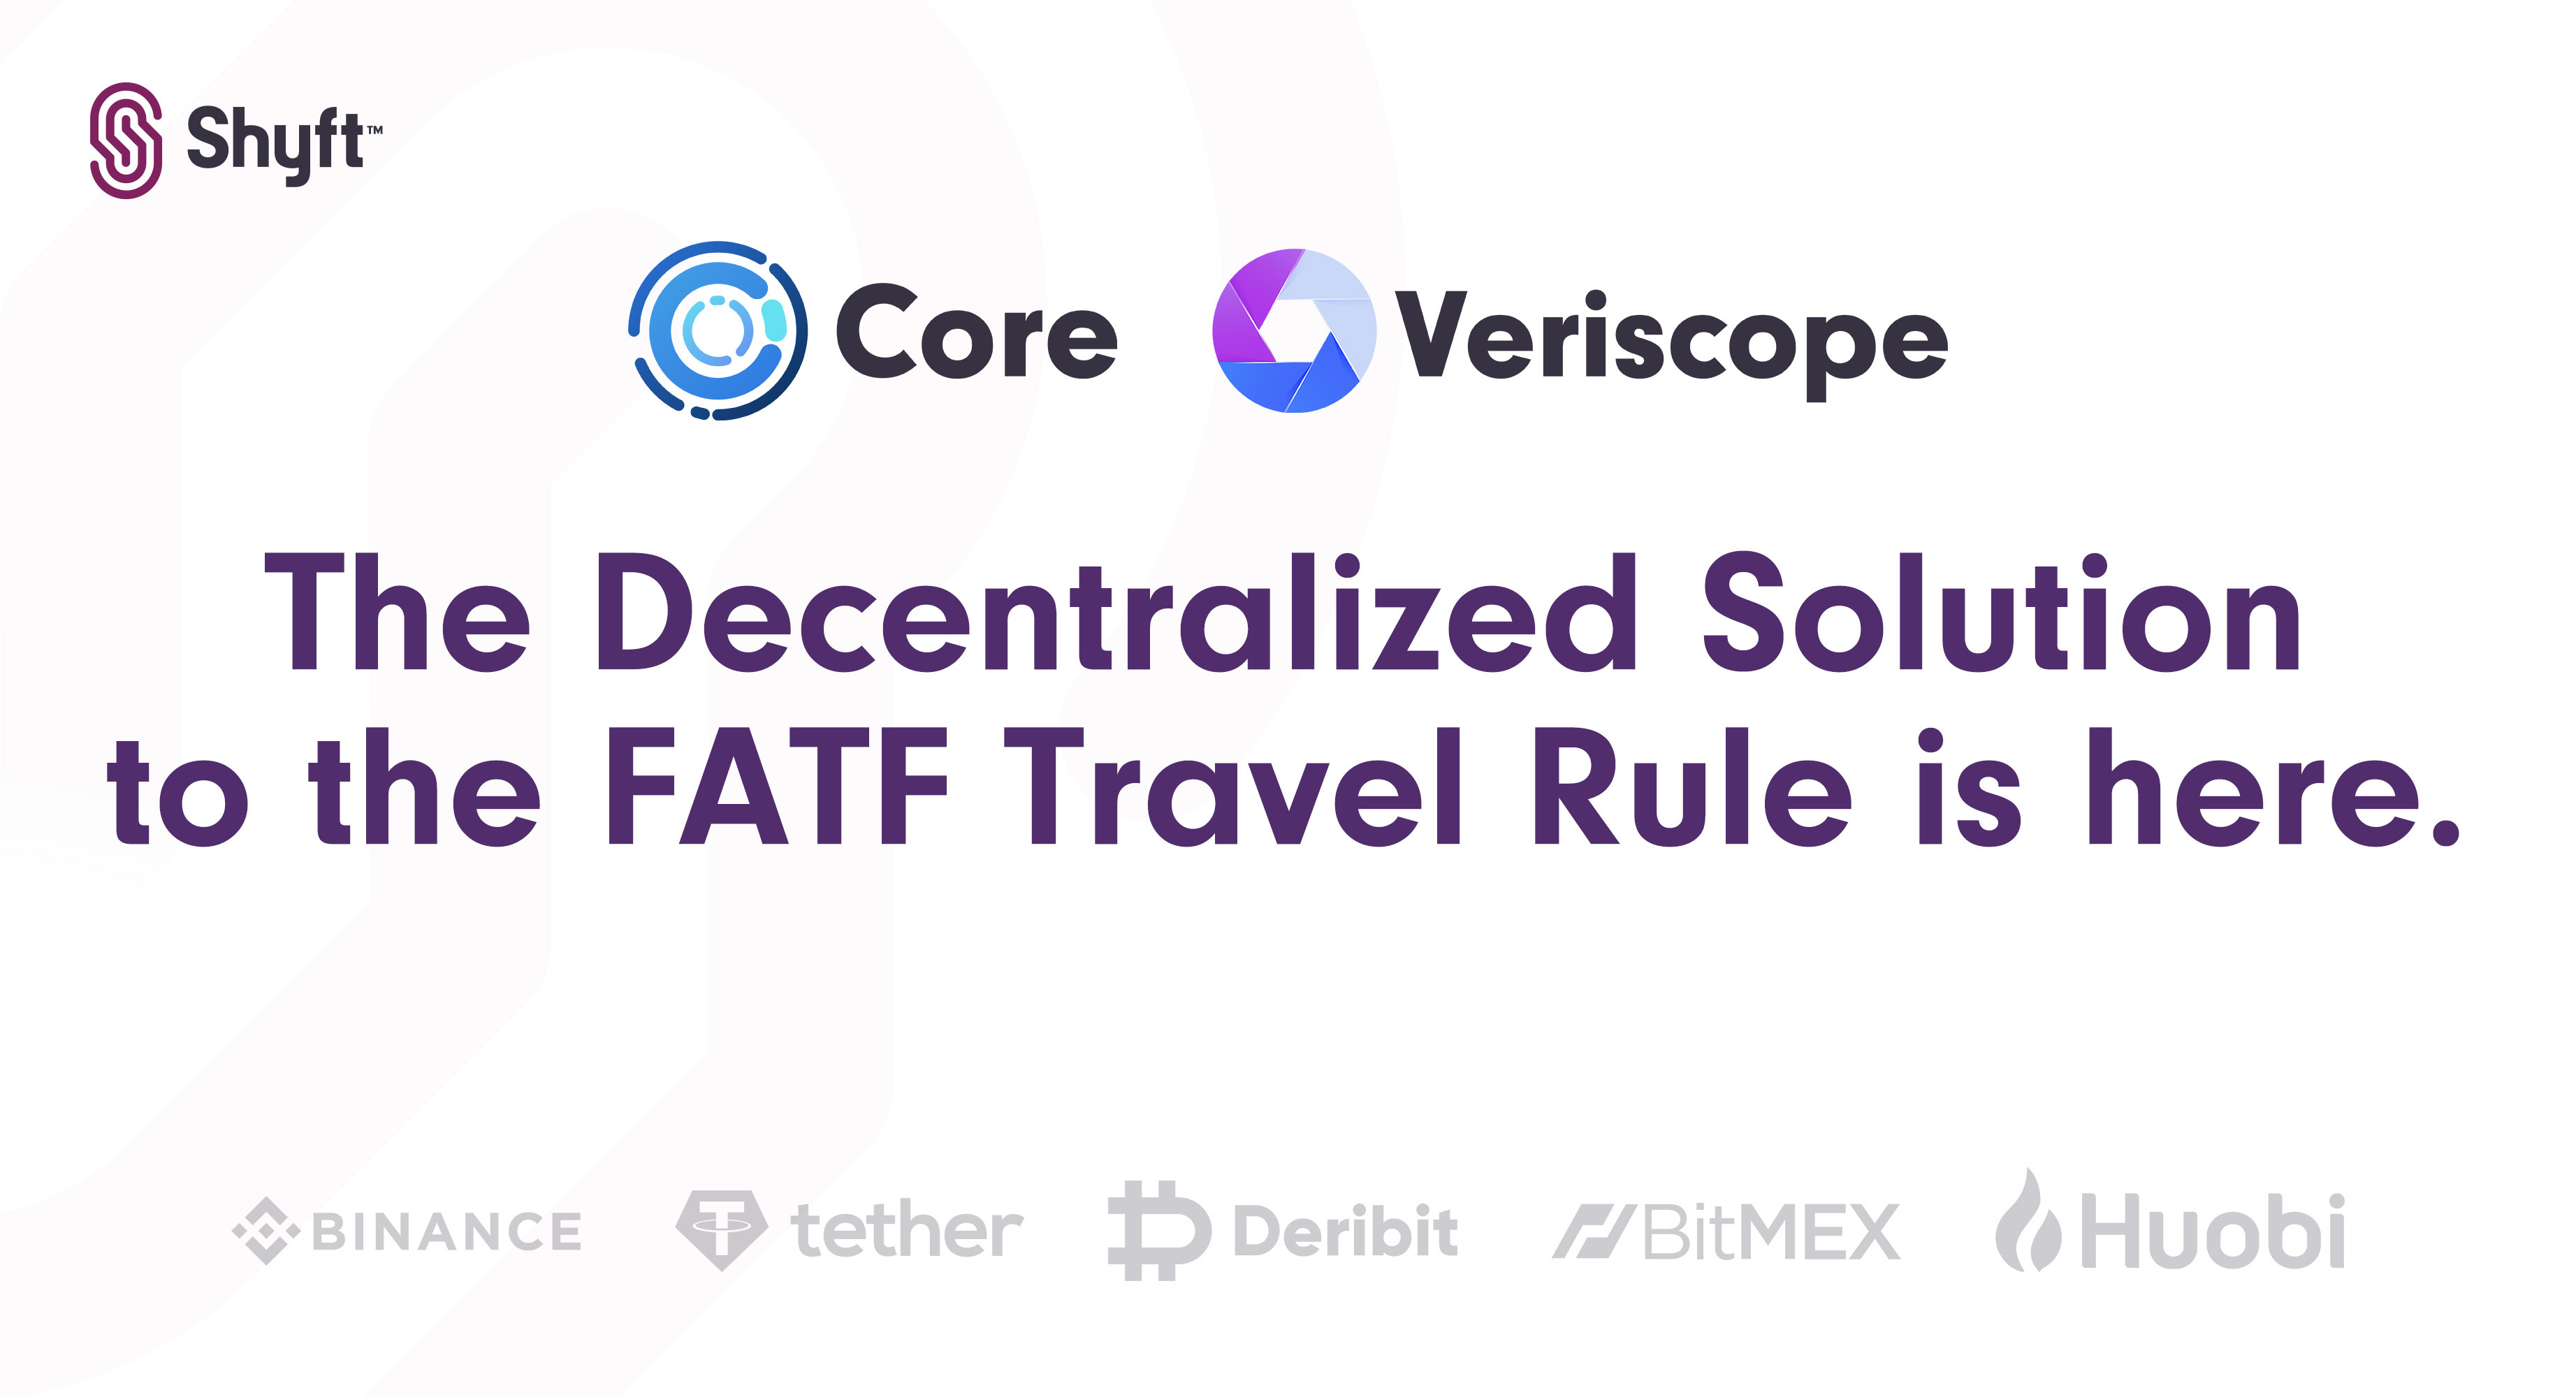 Global Crypto Exchanges Begin Phased Deployment of Veriscope: The Decentralized Solution to the FATF Travel Rule